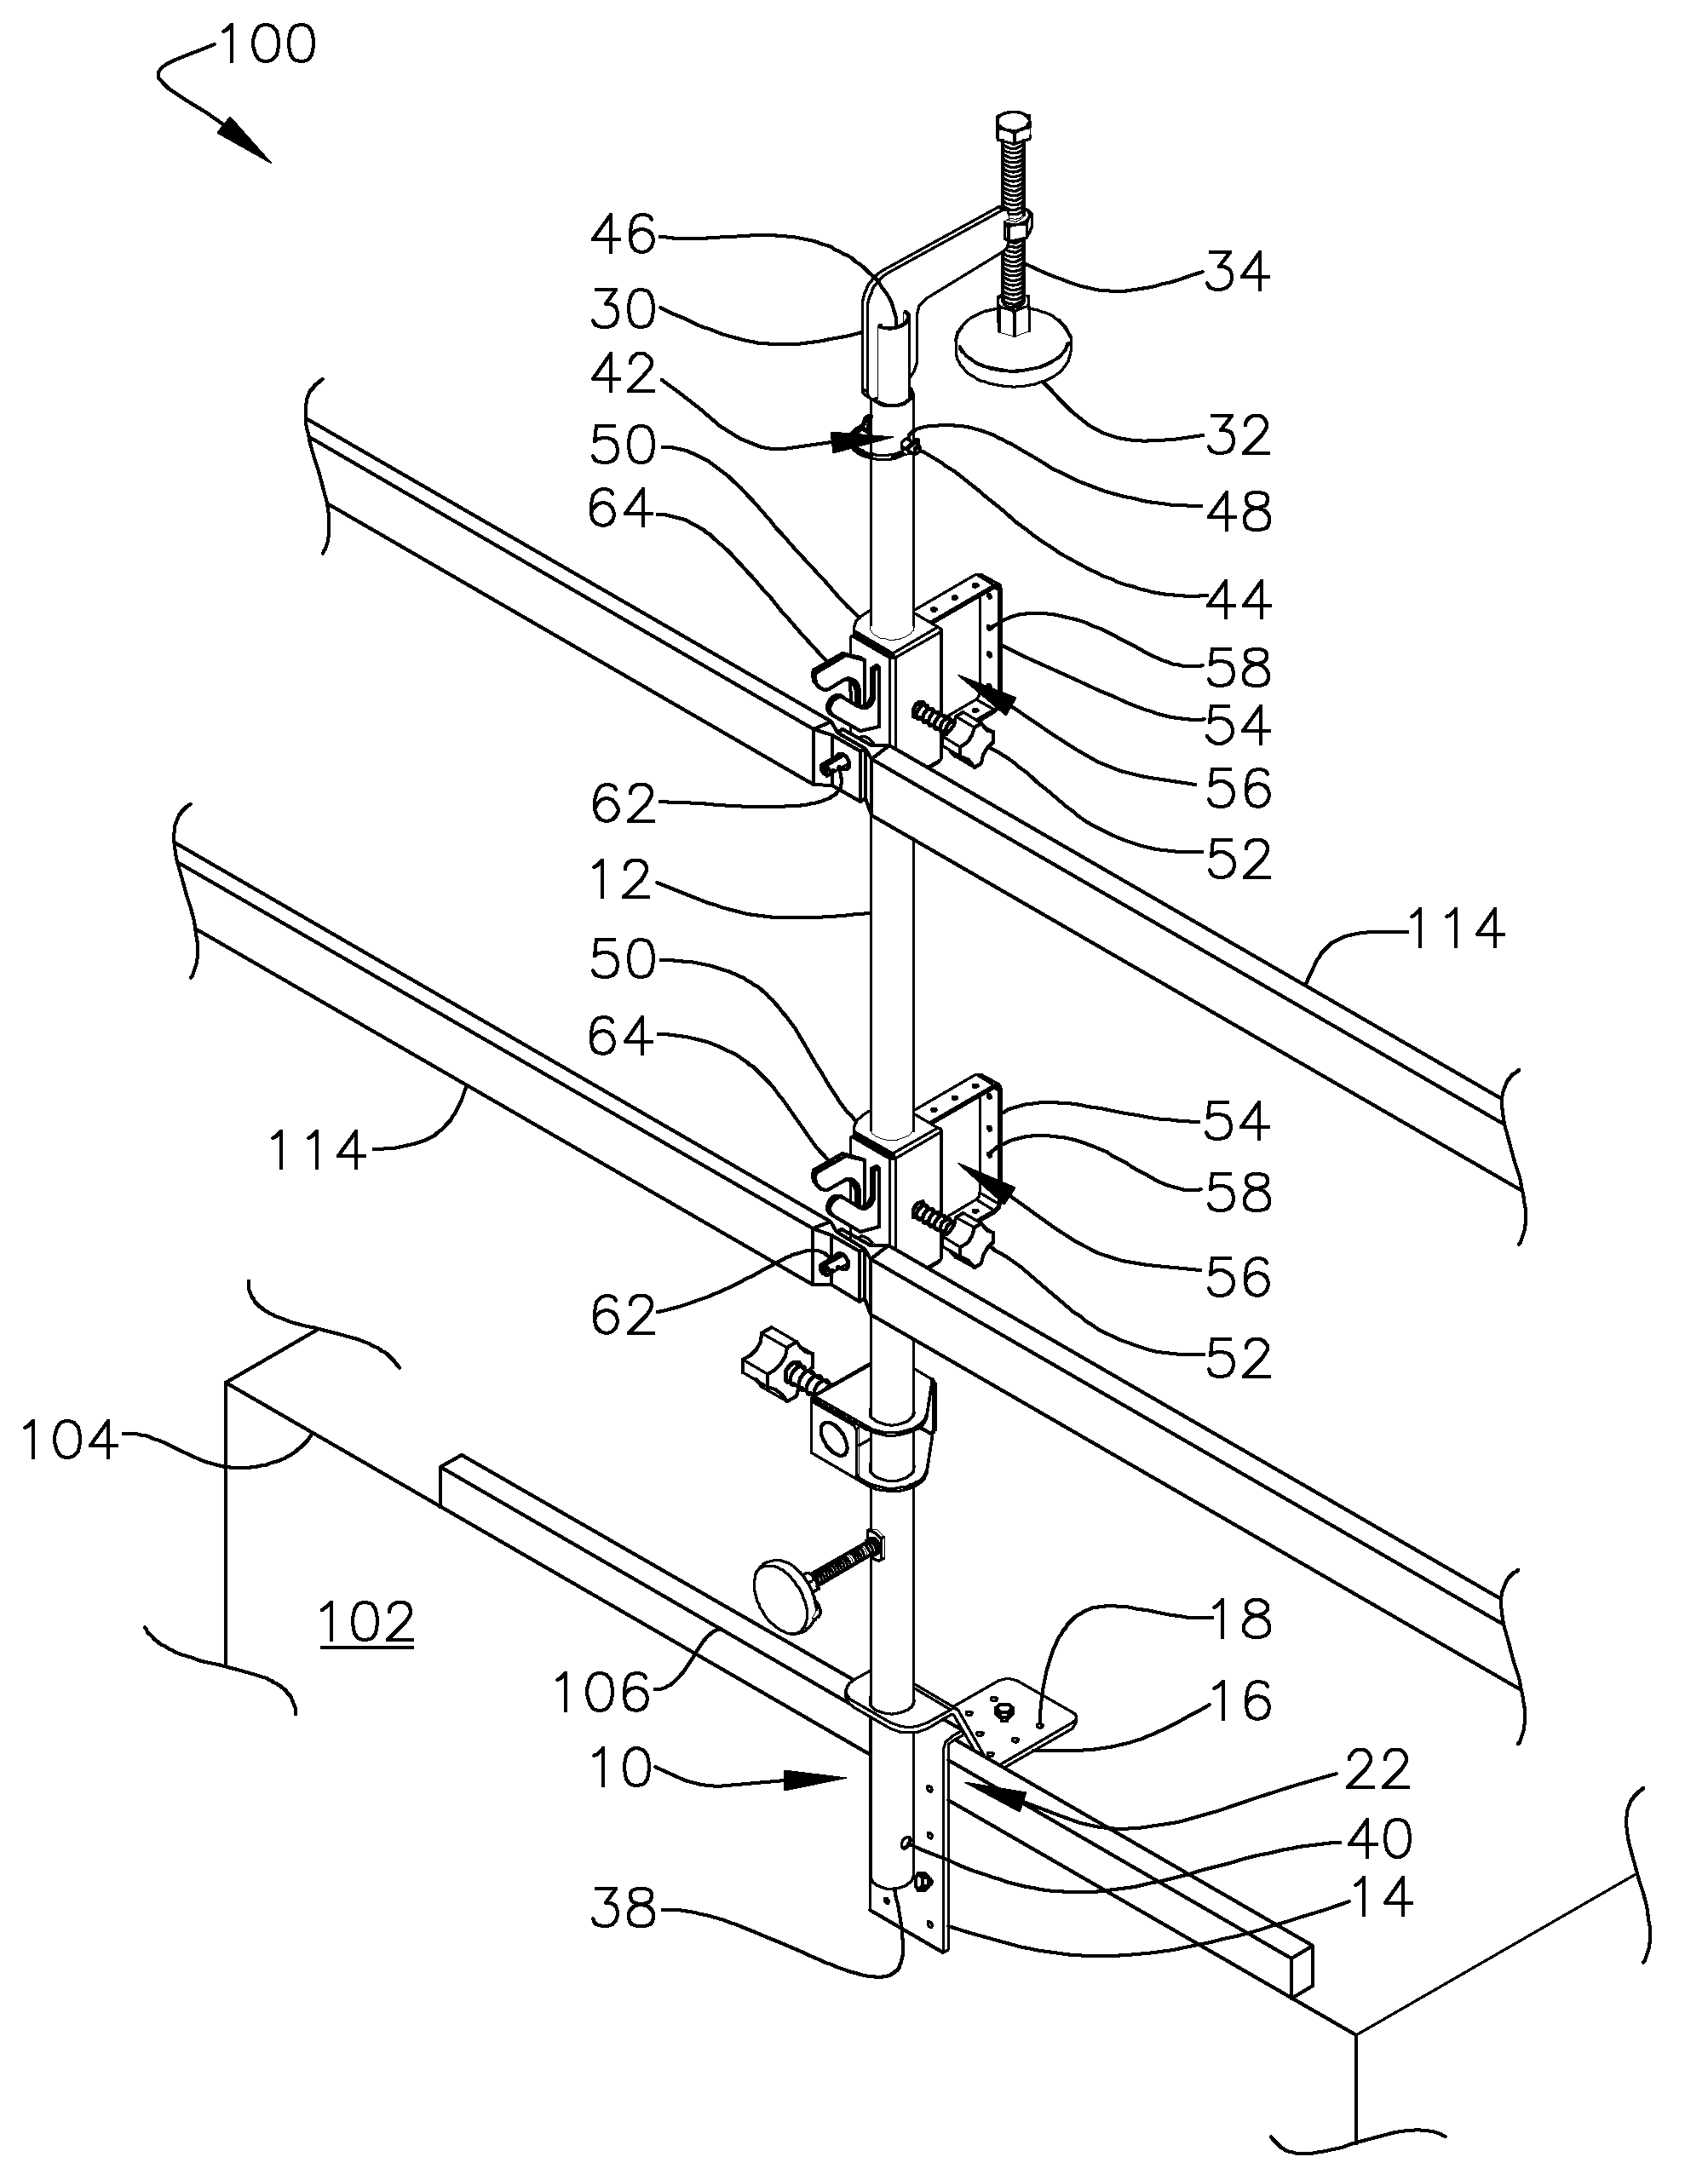 Elevated surface safety base and post apparatus